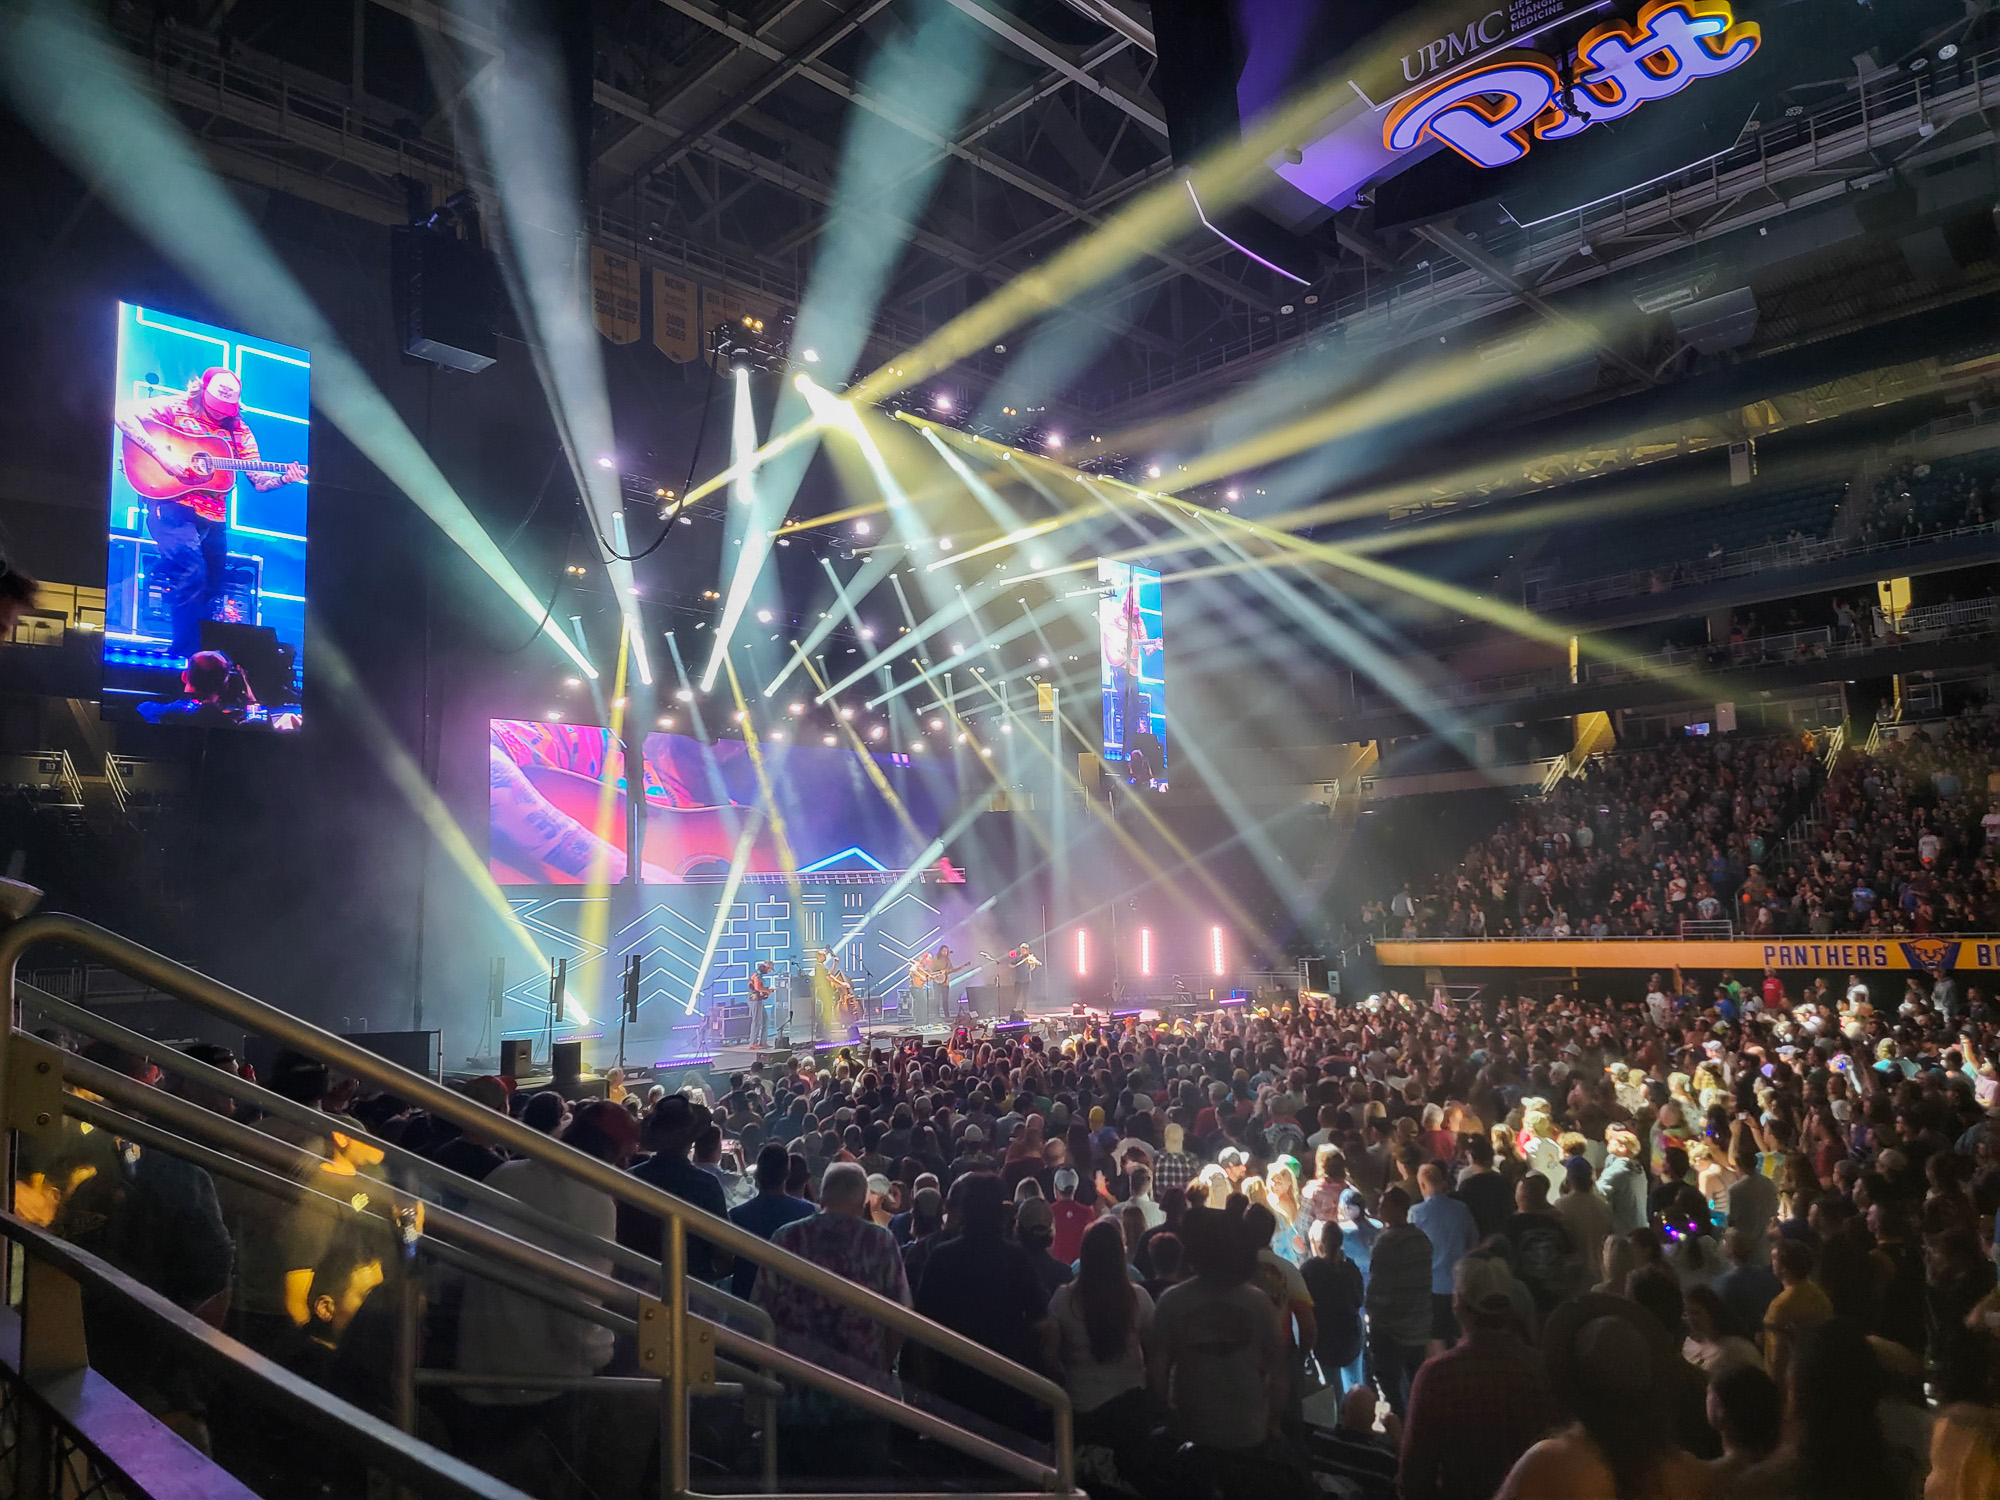 Concerts at the Petersen Events Center